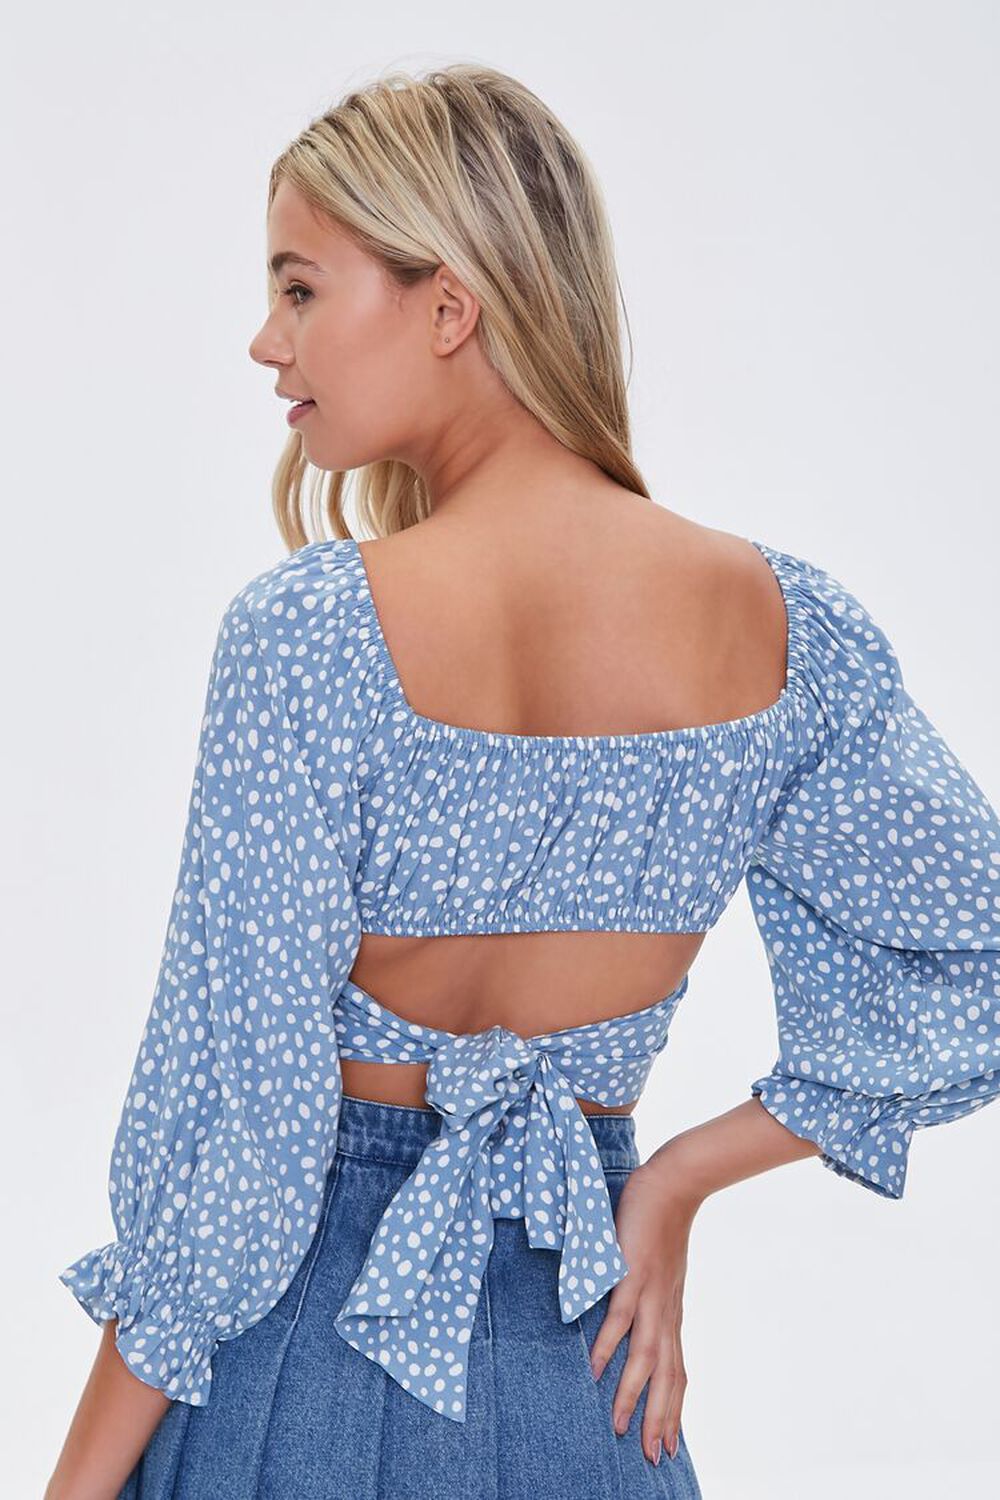 BLUE/WHITE Spotted Print Bow Crop Top, image 3